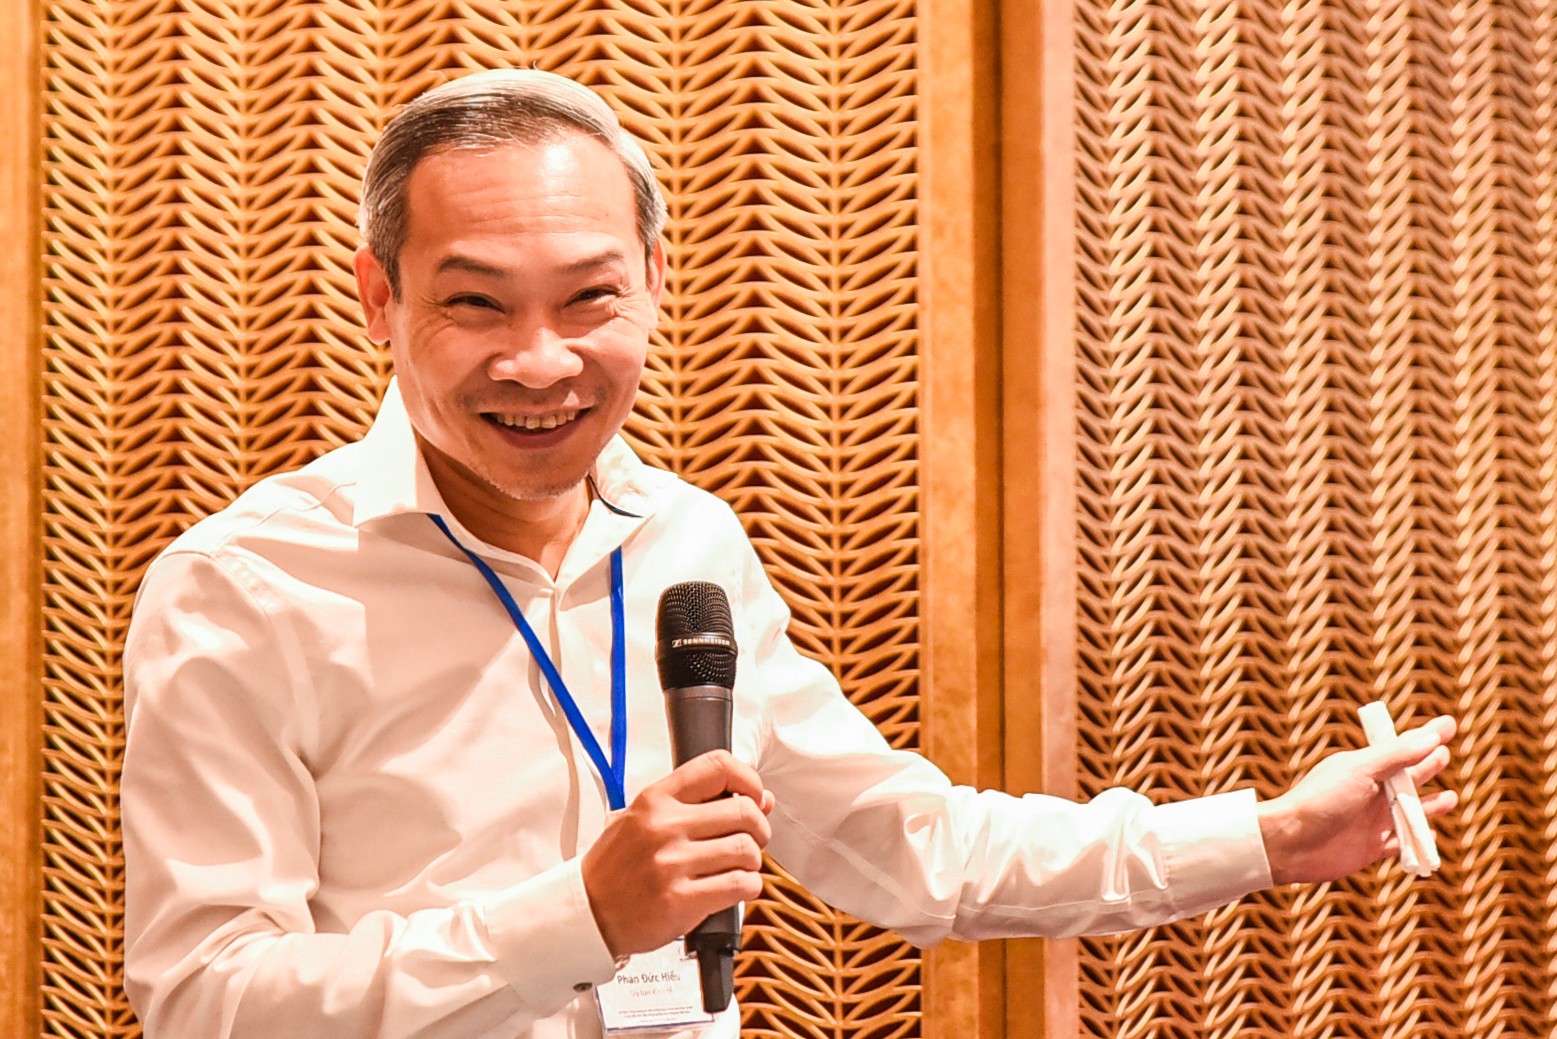 Mr. Phan Duc Hieu, Standing Member of the Economic Committee of the National Assembly, at the workshop. Photo: Quynh Chi.